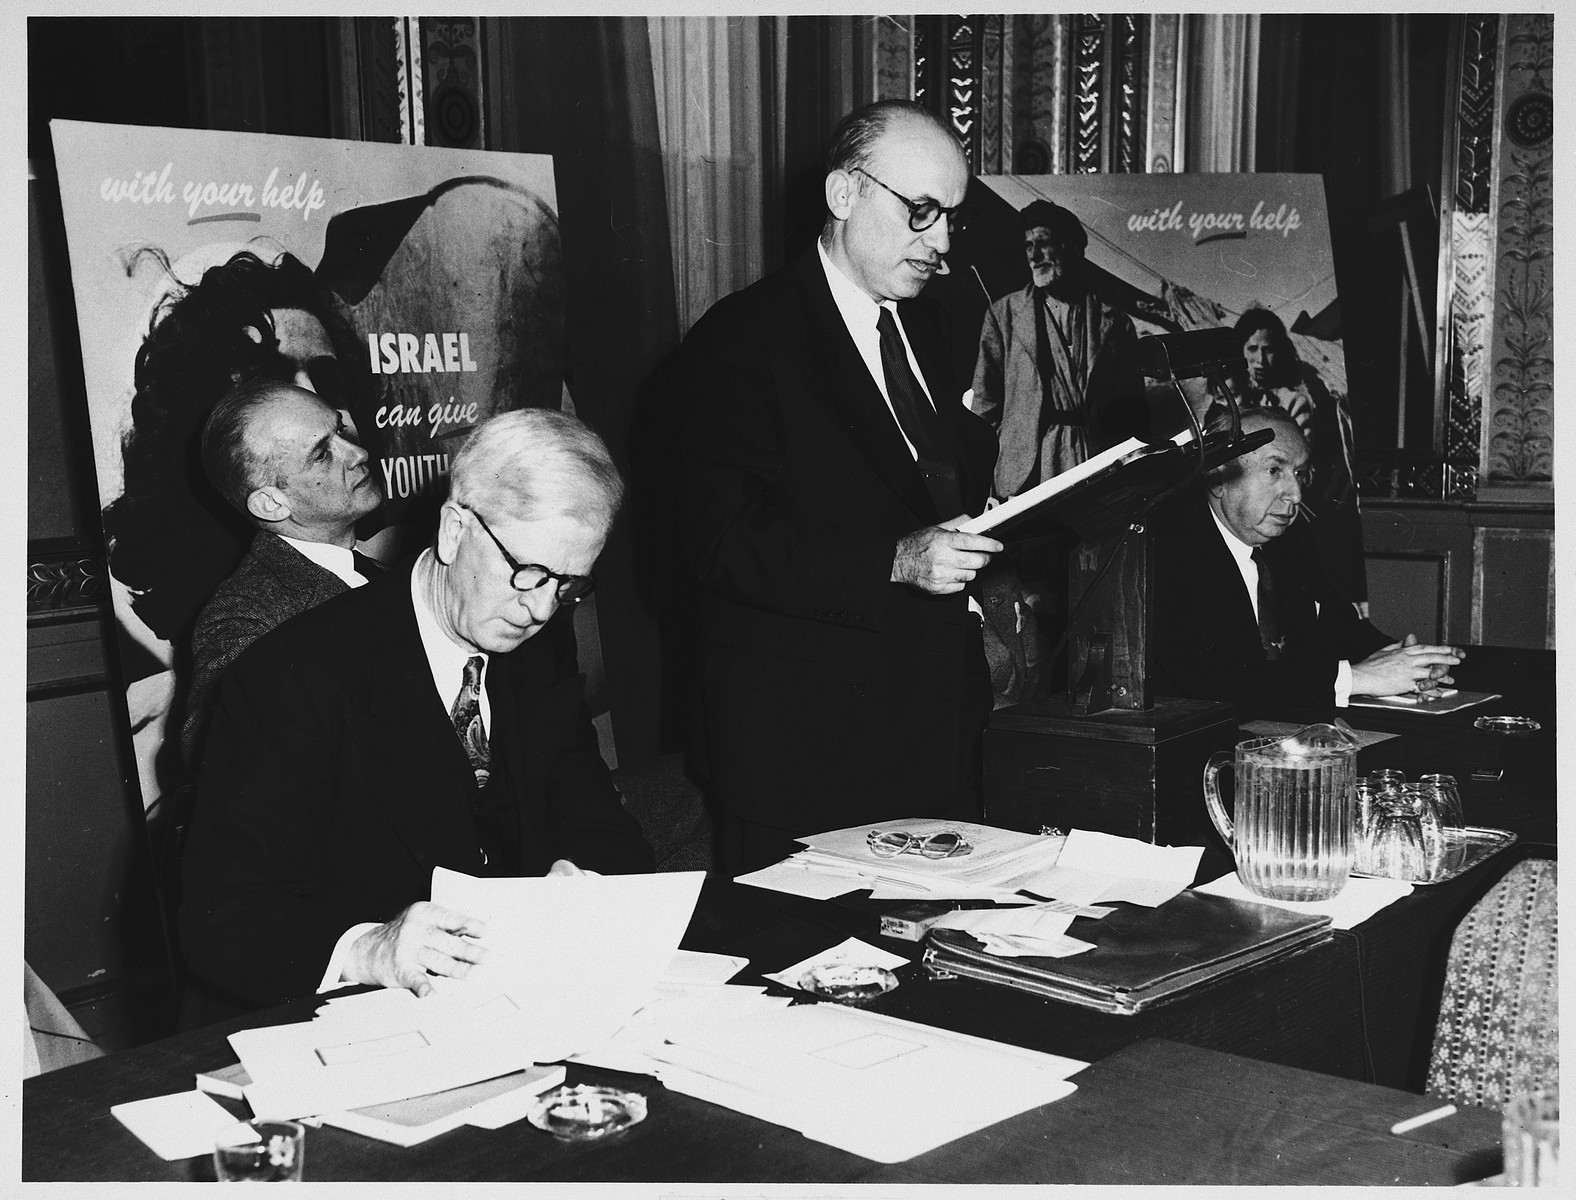 James G. McDonald (seated, left), Chairman of the Advisory Council, Development Corporation for Israel, looks through his papers while attending a conference about fundraising for the State of Israel.